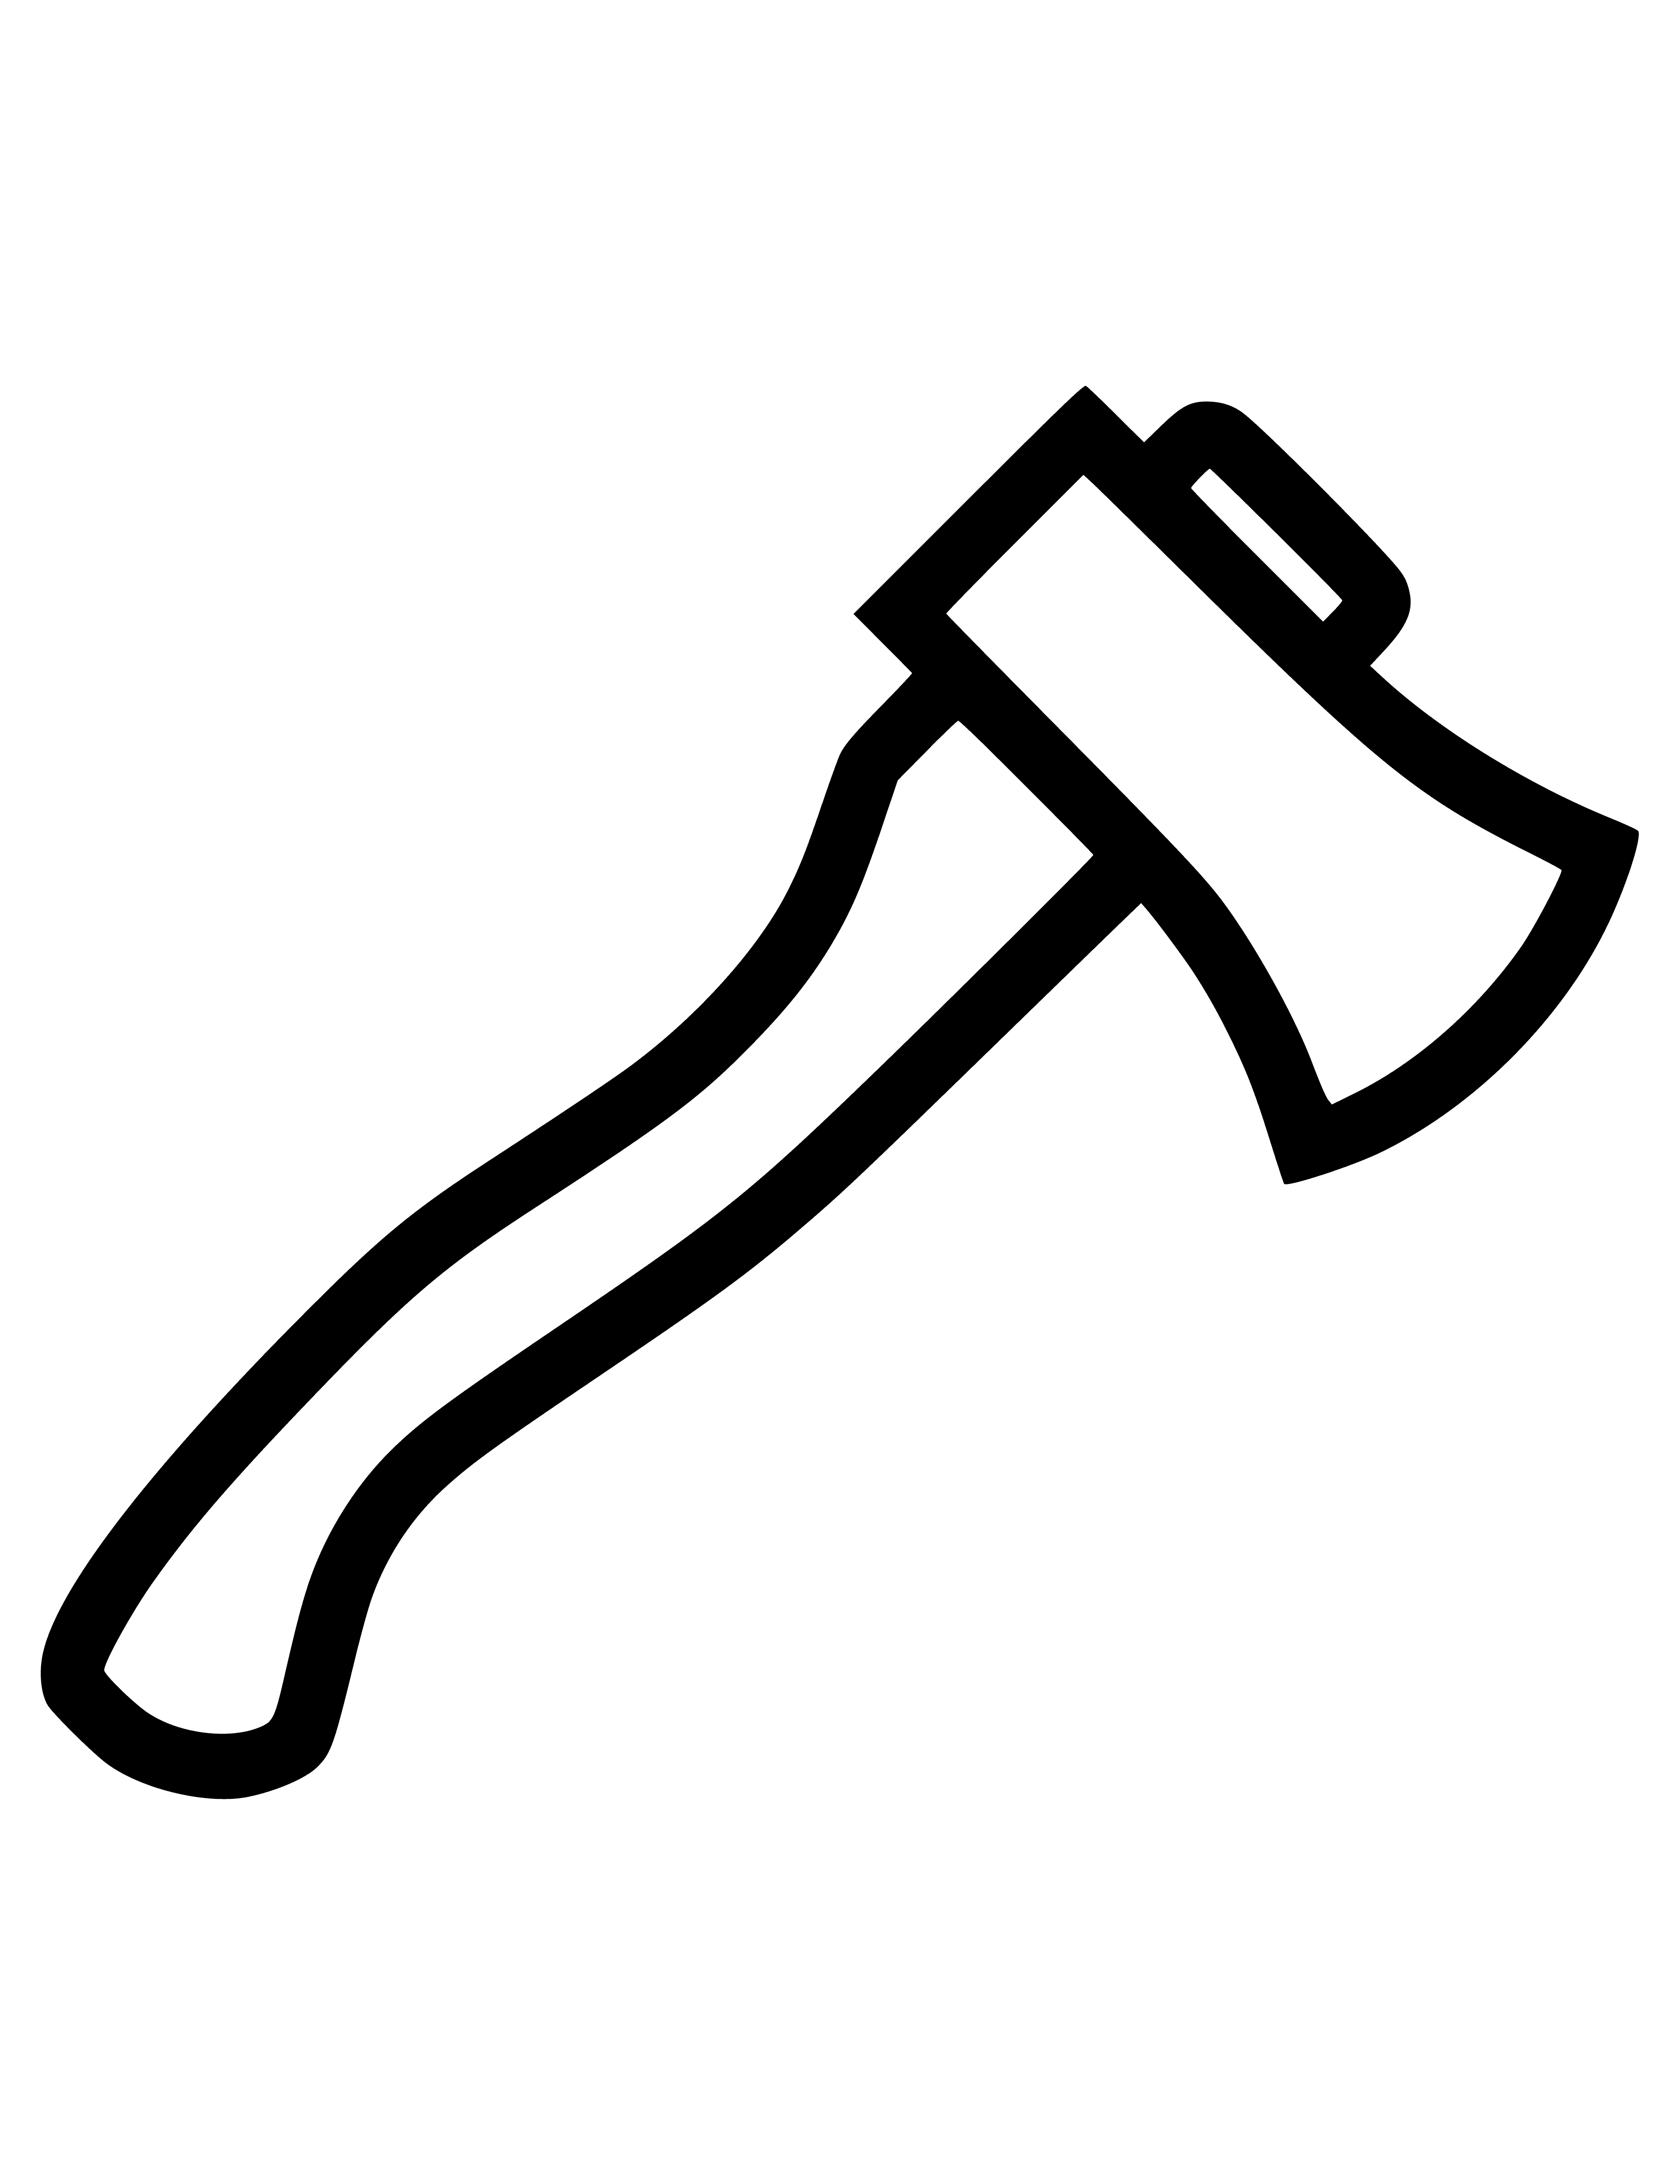 coloring page: Axe has handle, sharp blade, and point. Used to chop wood.